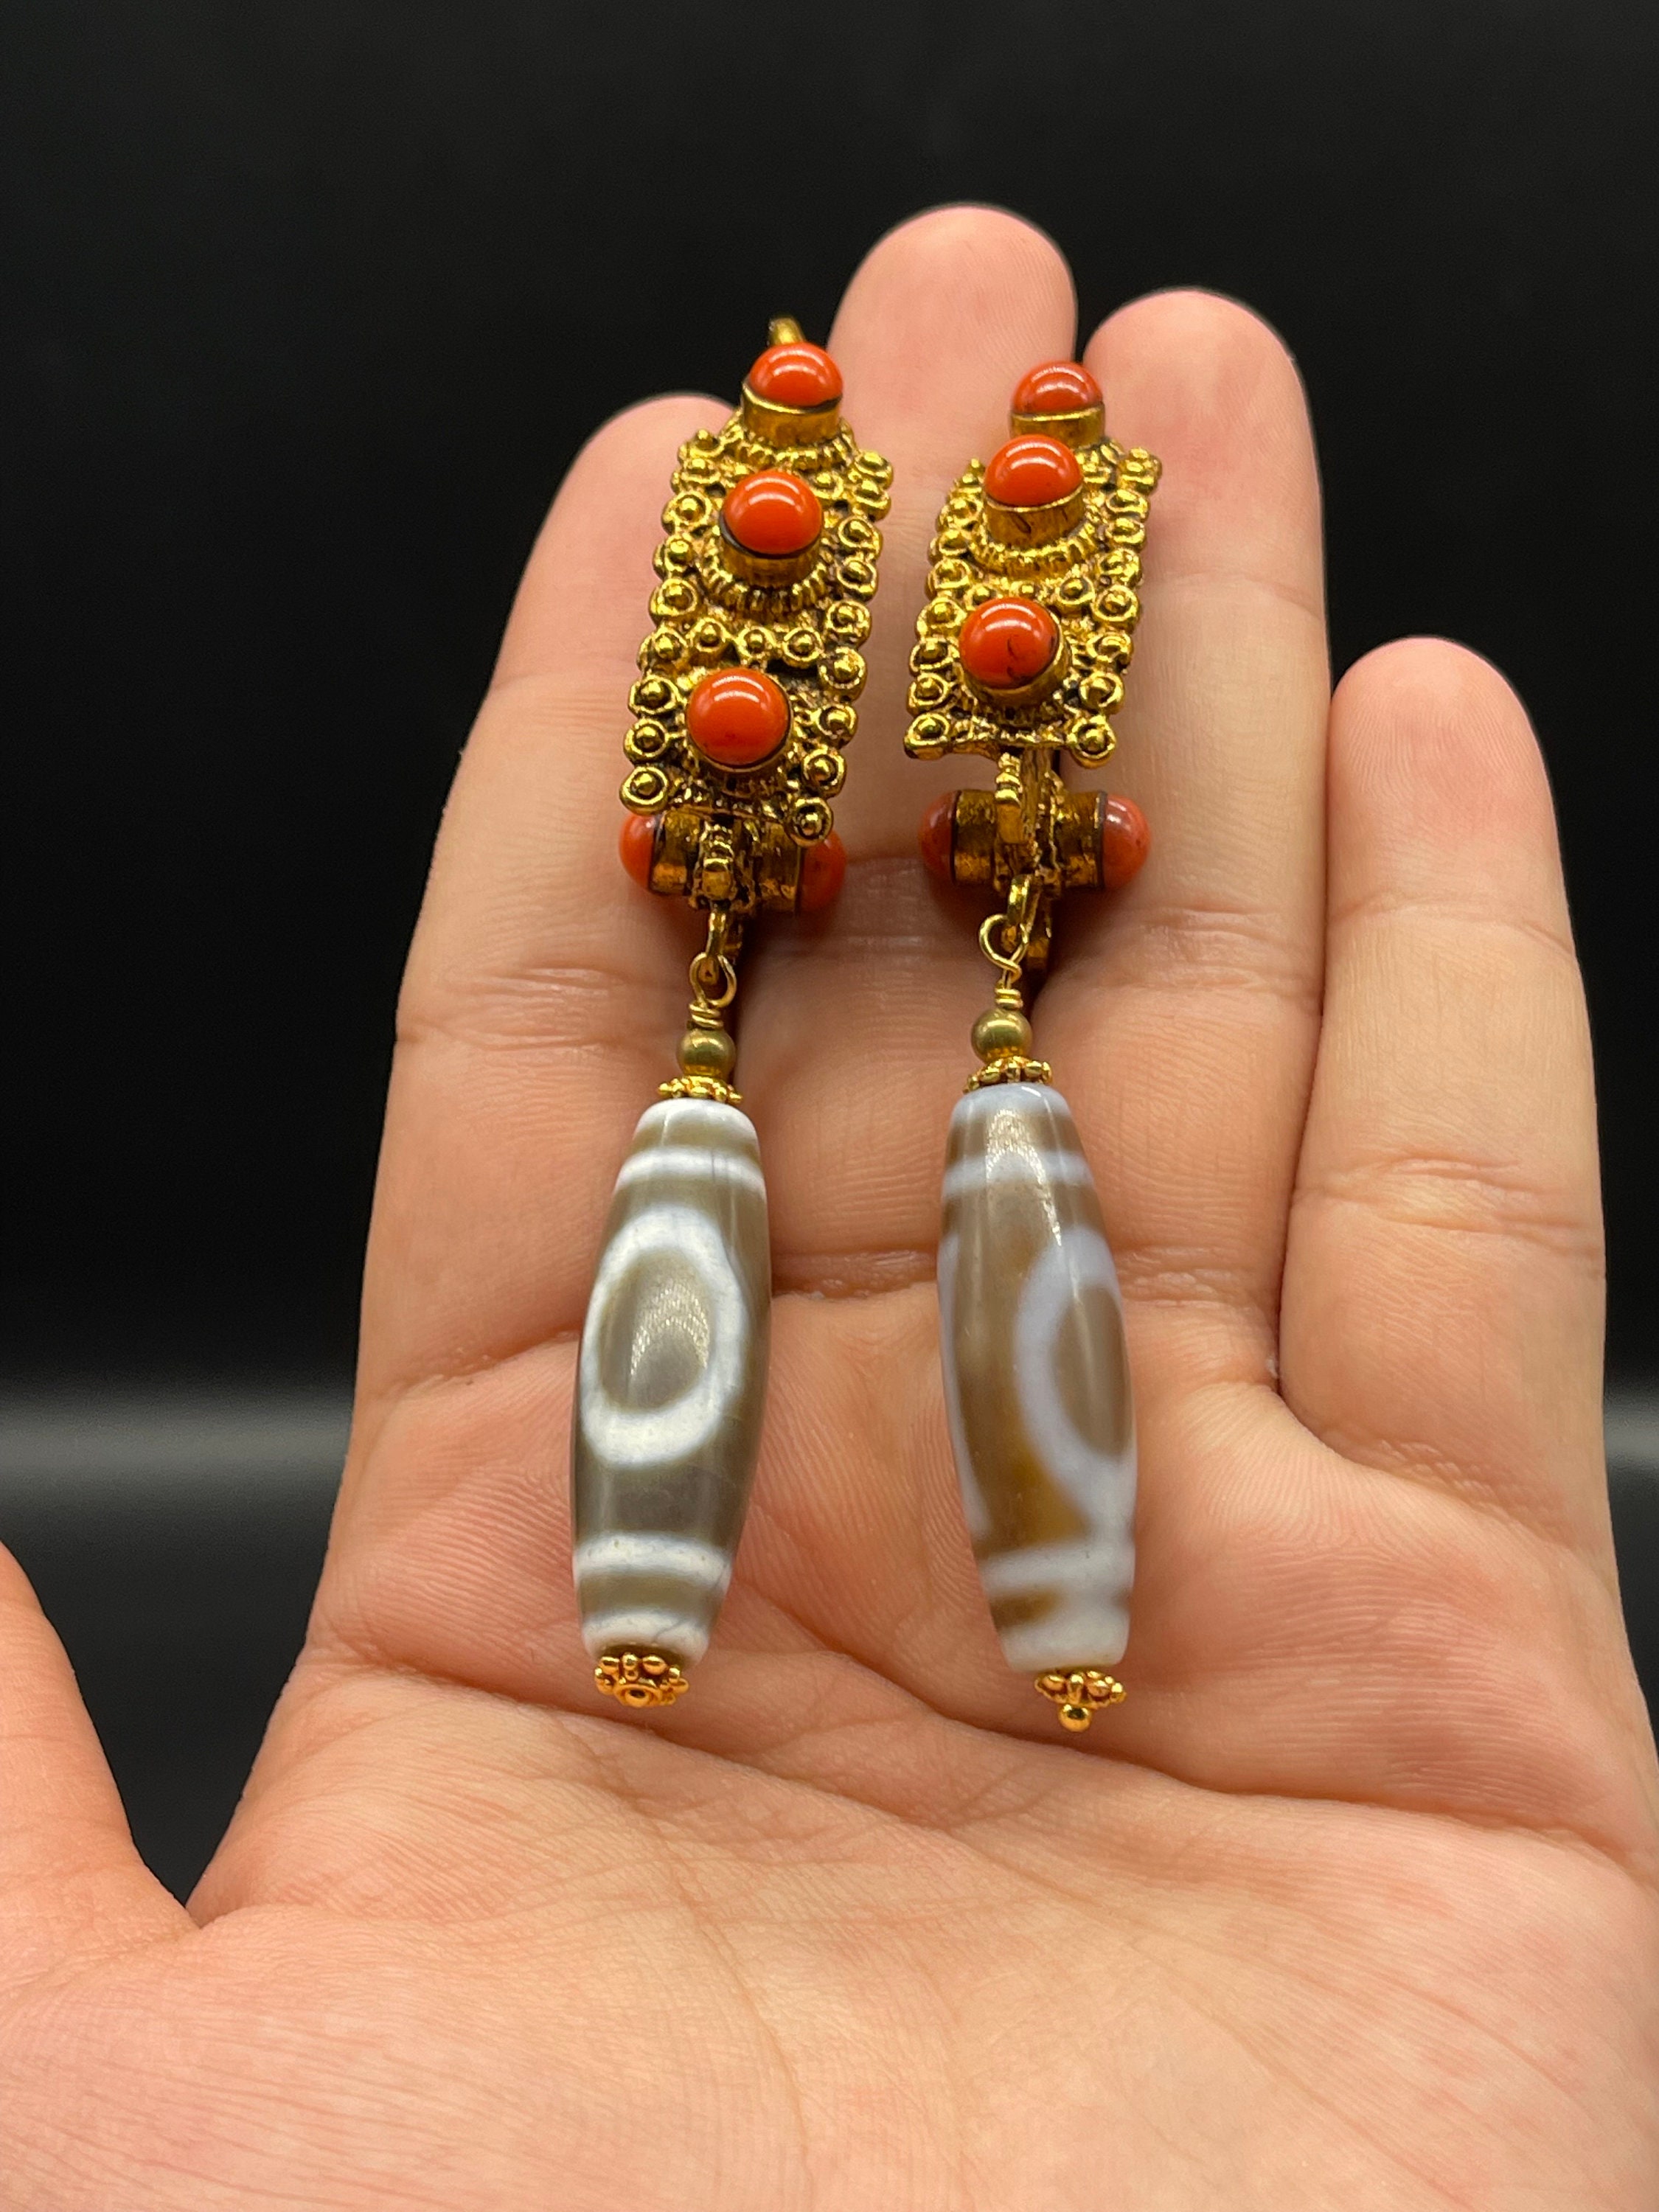 Gorgeous Old Antique Tibetan Ceremonial Earring With Brass and Antique  Coral Earrings, Ceremonial Ear Ornament Ancient Tibetan Jewellery - Etsy  Sweden